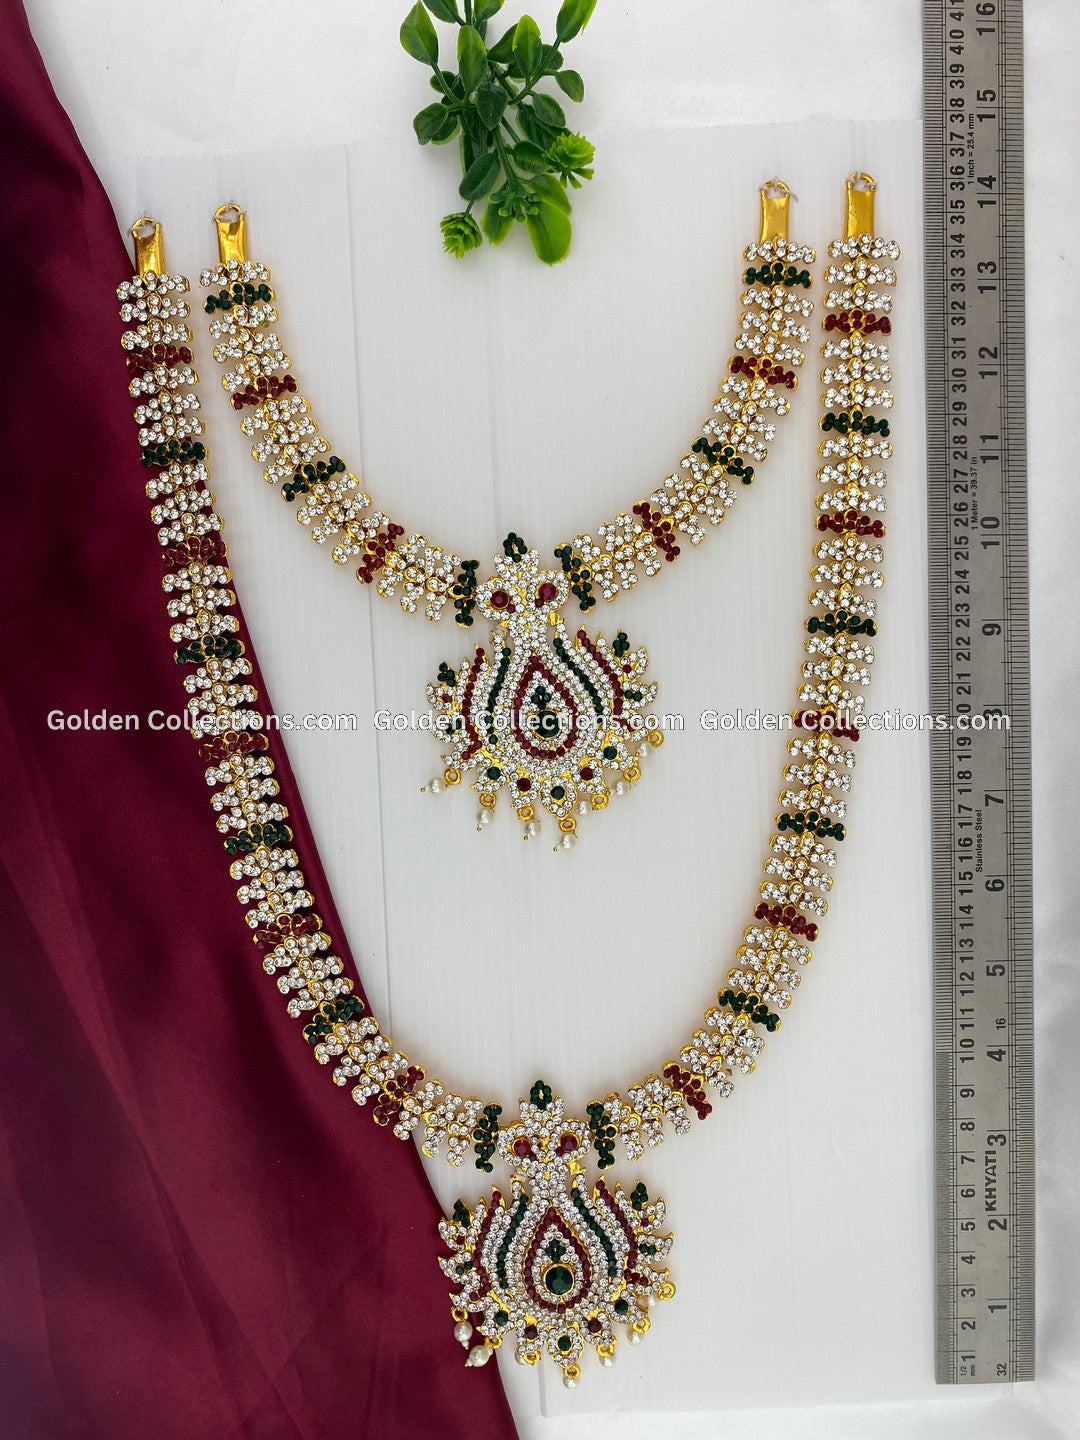 Artistic God Goddess Artificial Jewellery - GoldenCollections 2